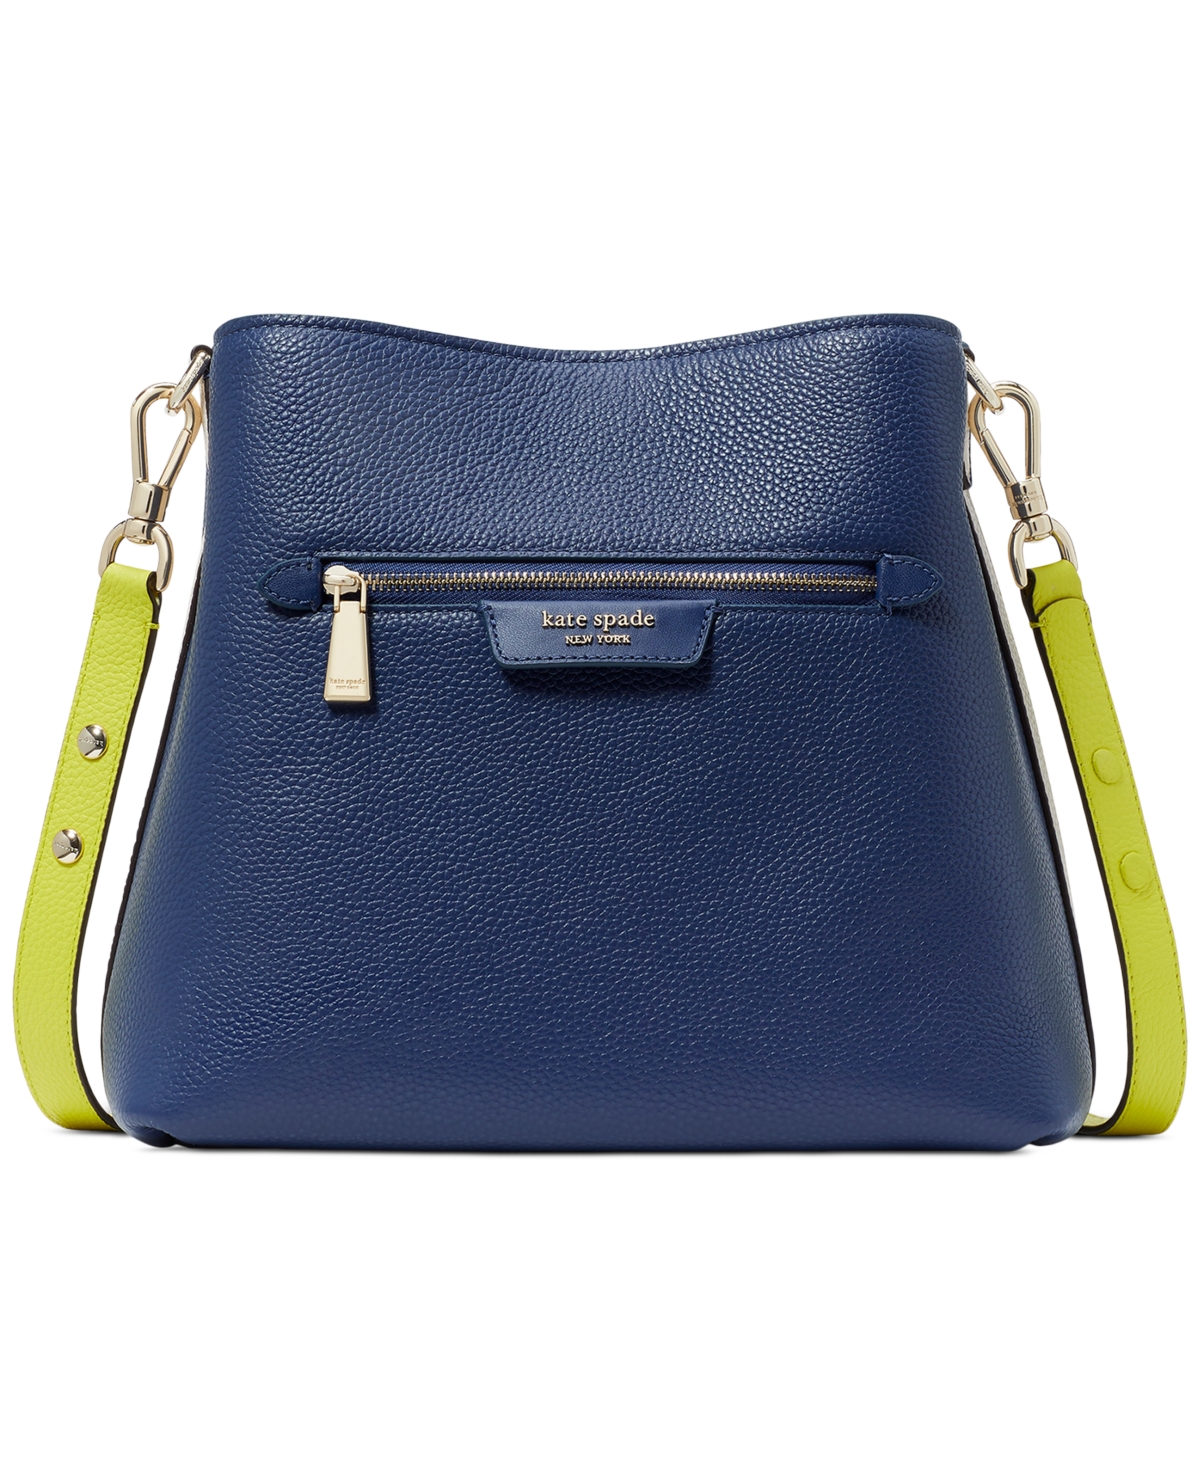 Hudson Colorblocked Pebbled Leather Small Shoulder Bag - Outerspace Multi